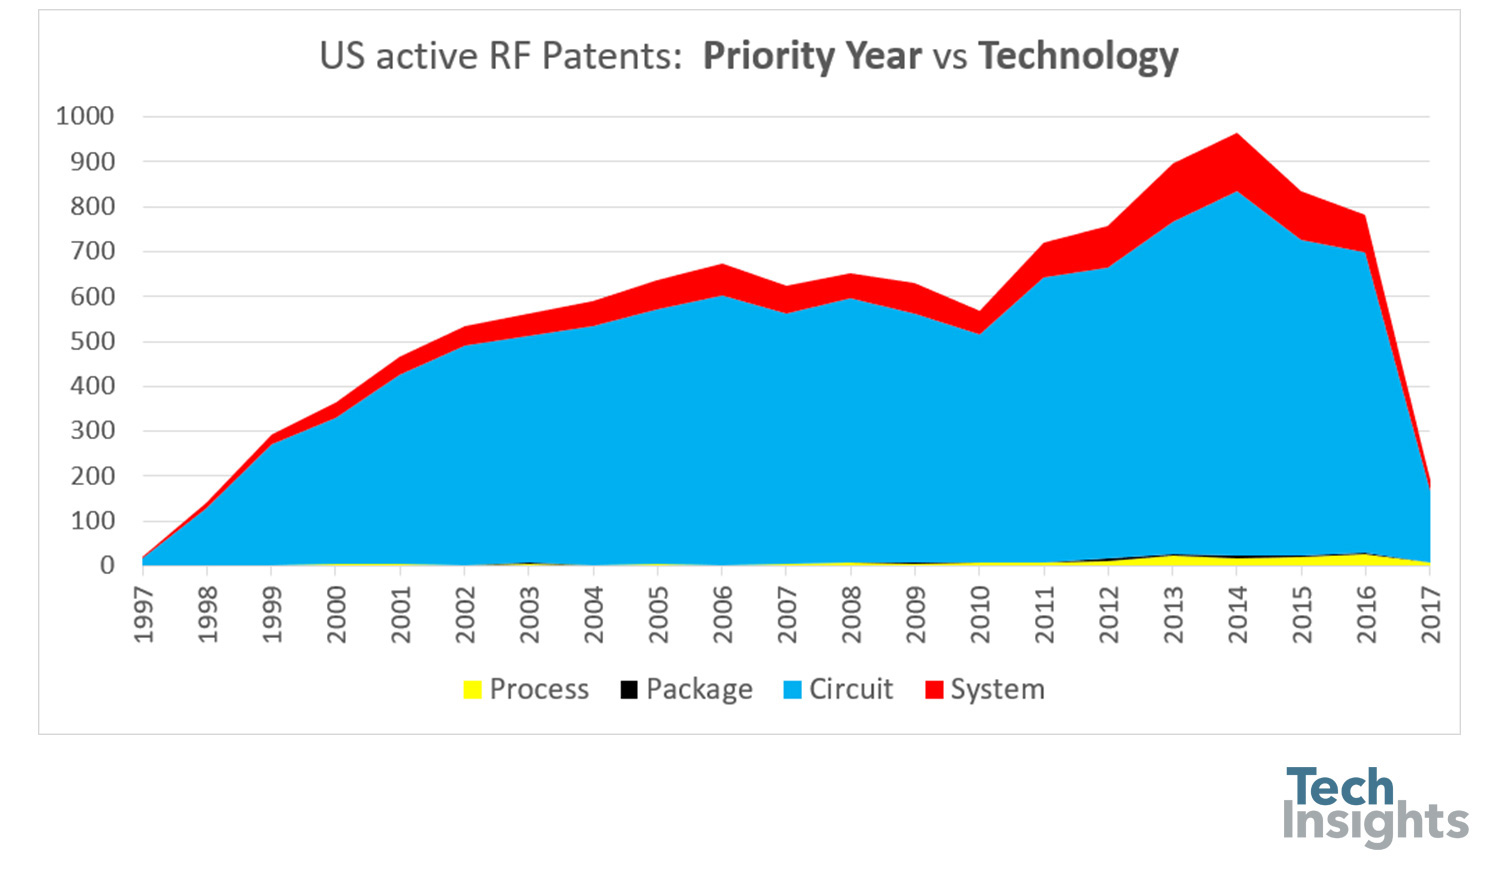 Patents in the mobile RF space are mostly related to circuits